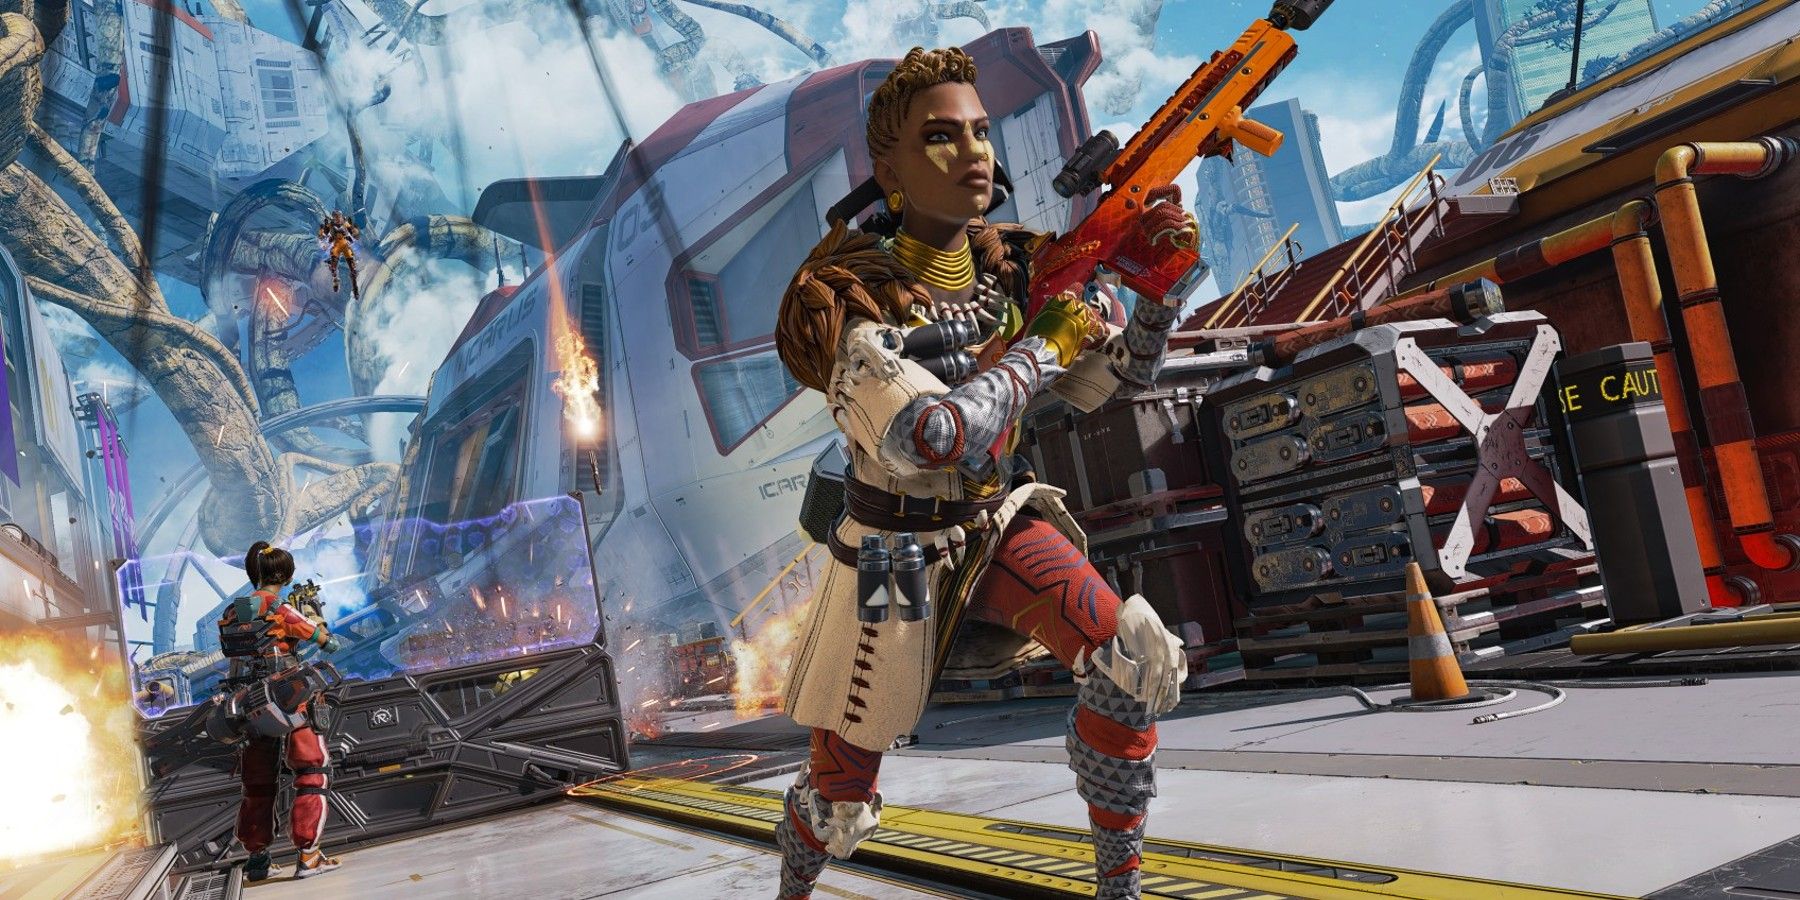 Apex Legends’ Popular ‘Moving While Looting’ Mechanic Is a Bug According to Dev